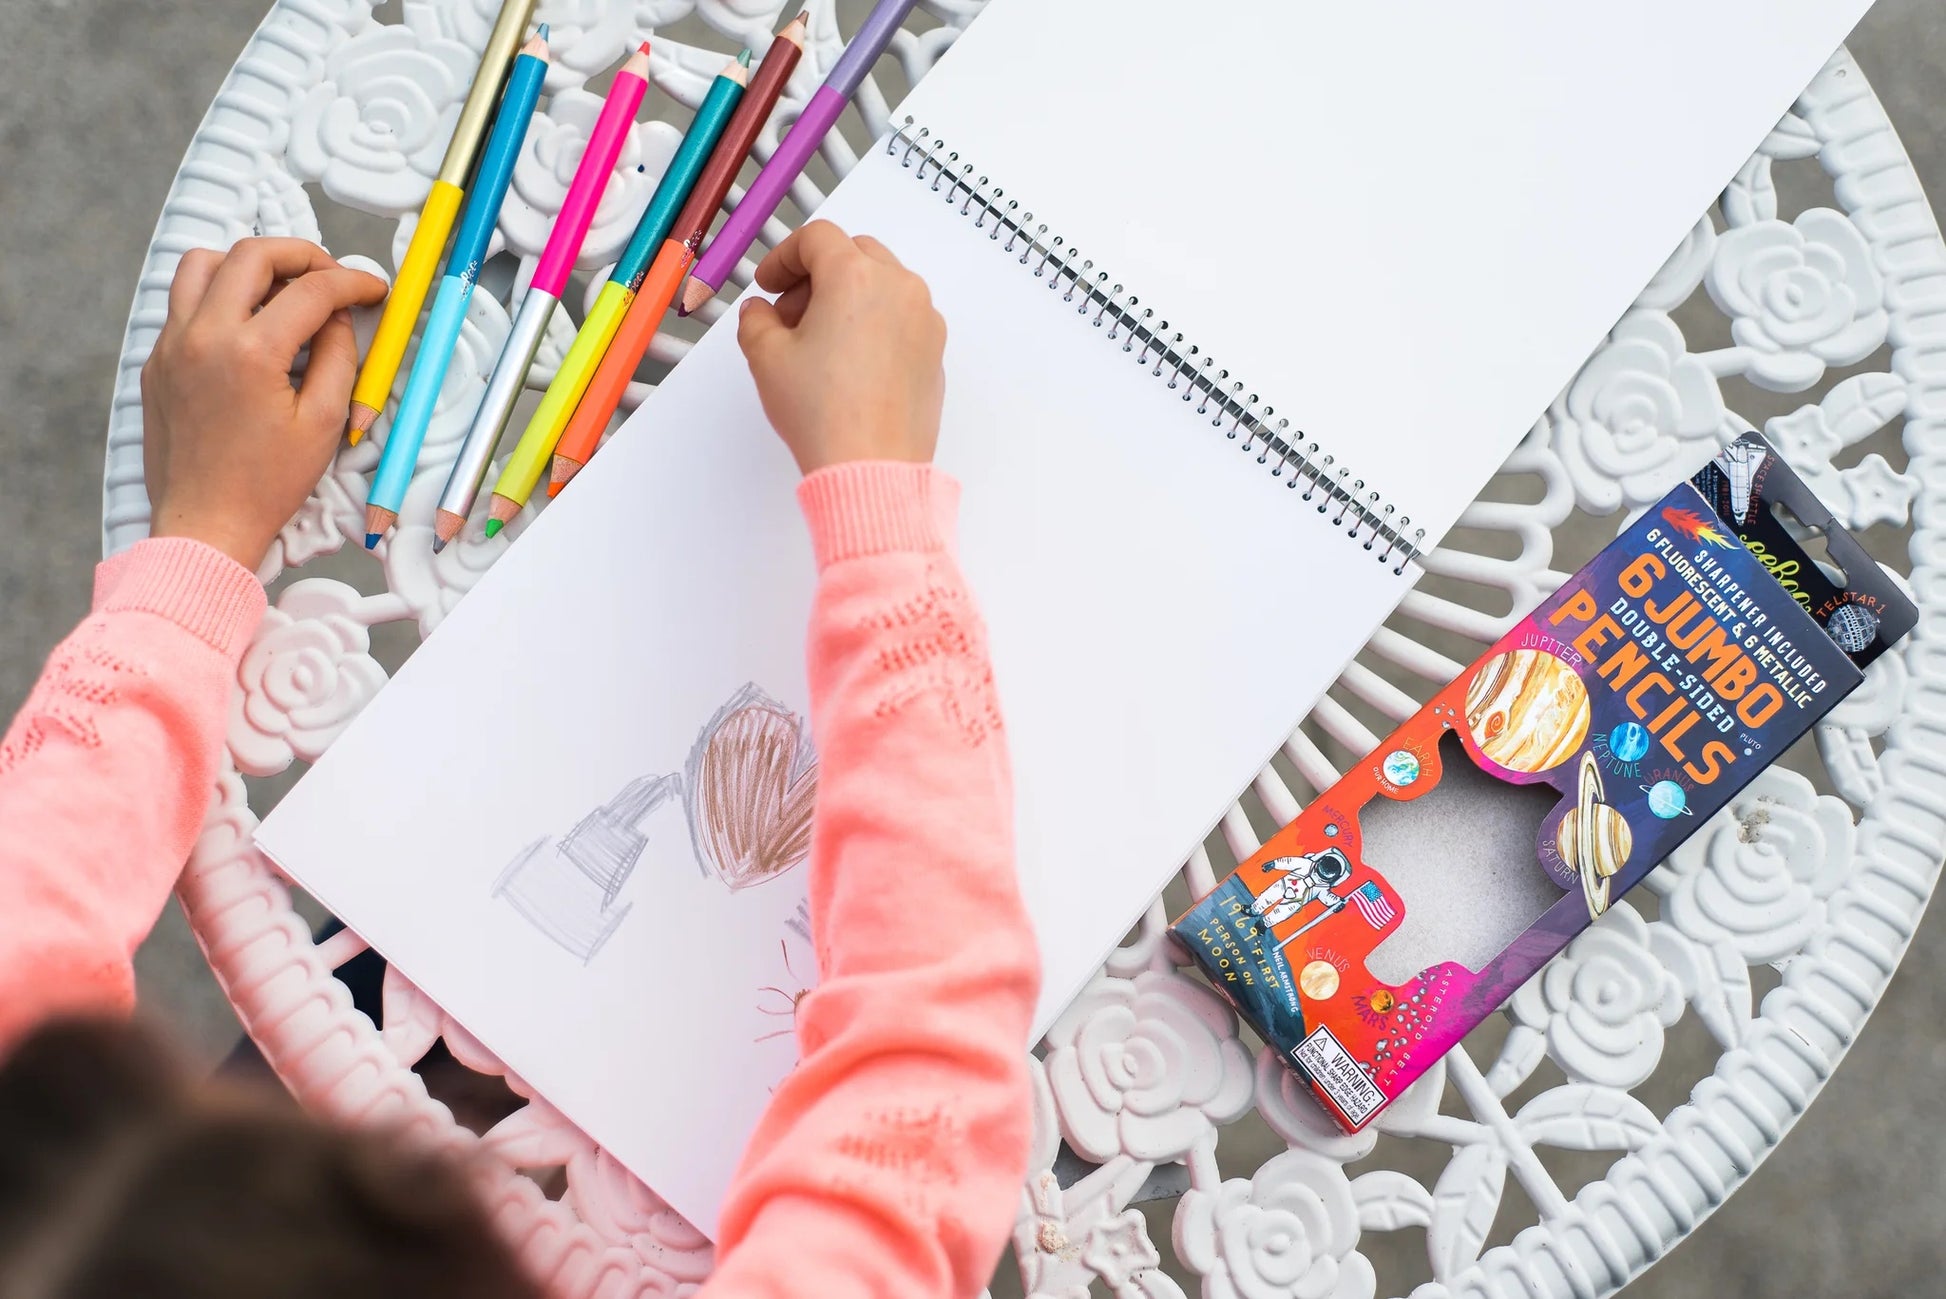 child wearing a pink sweater drawing with Solar System Double-Sided Jumbo Pencils on a sketchbook